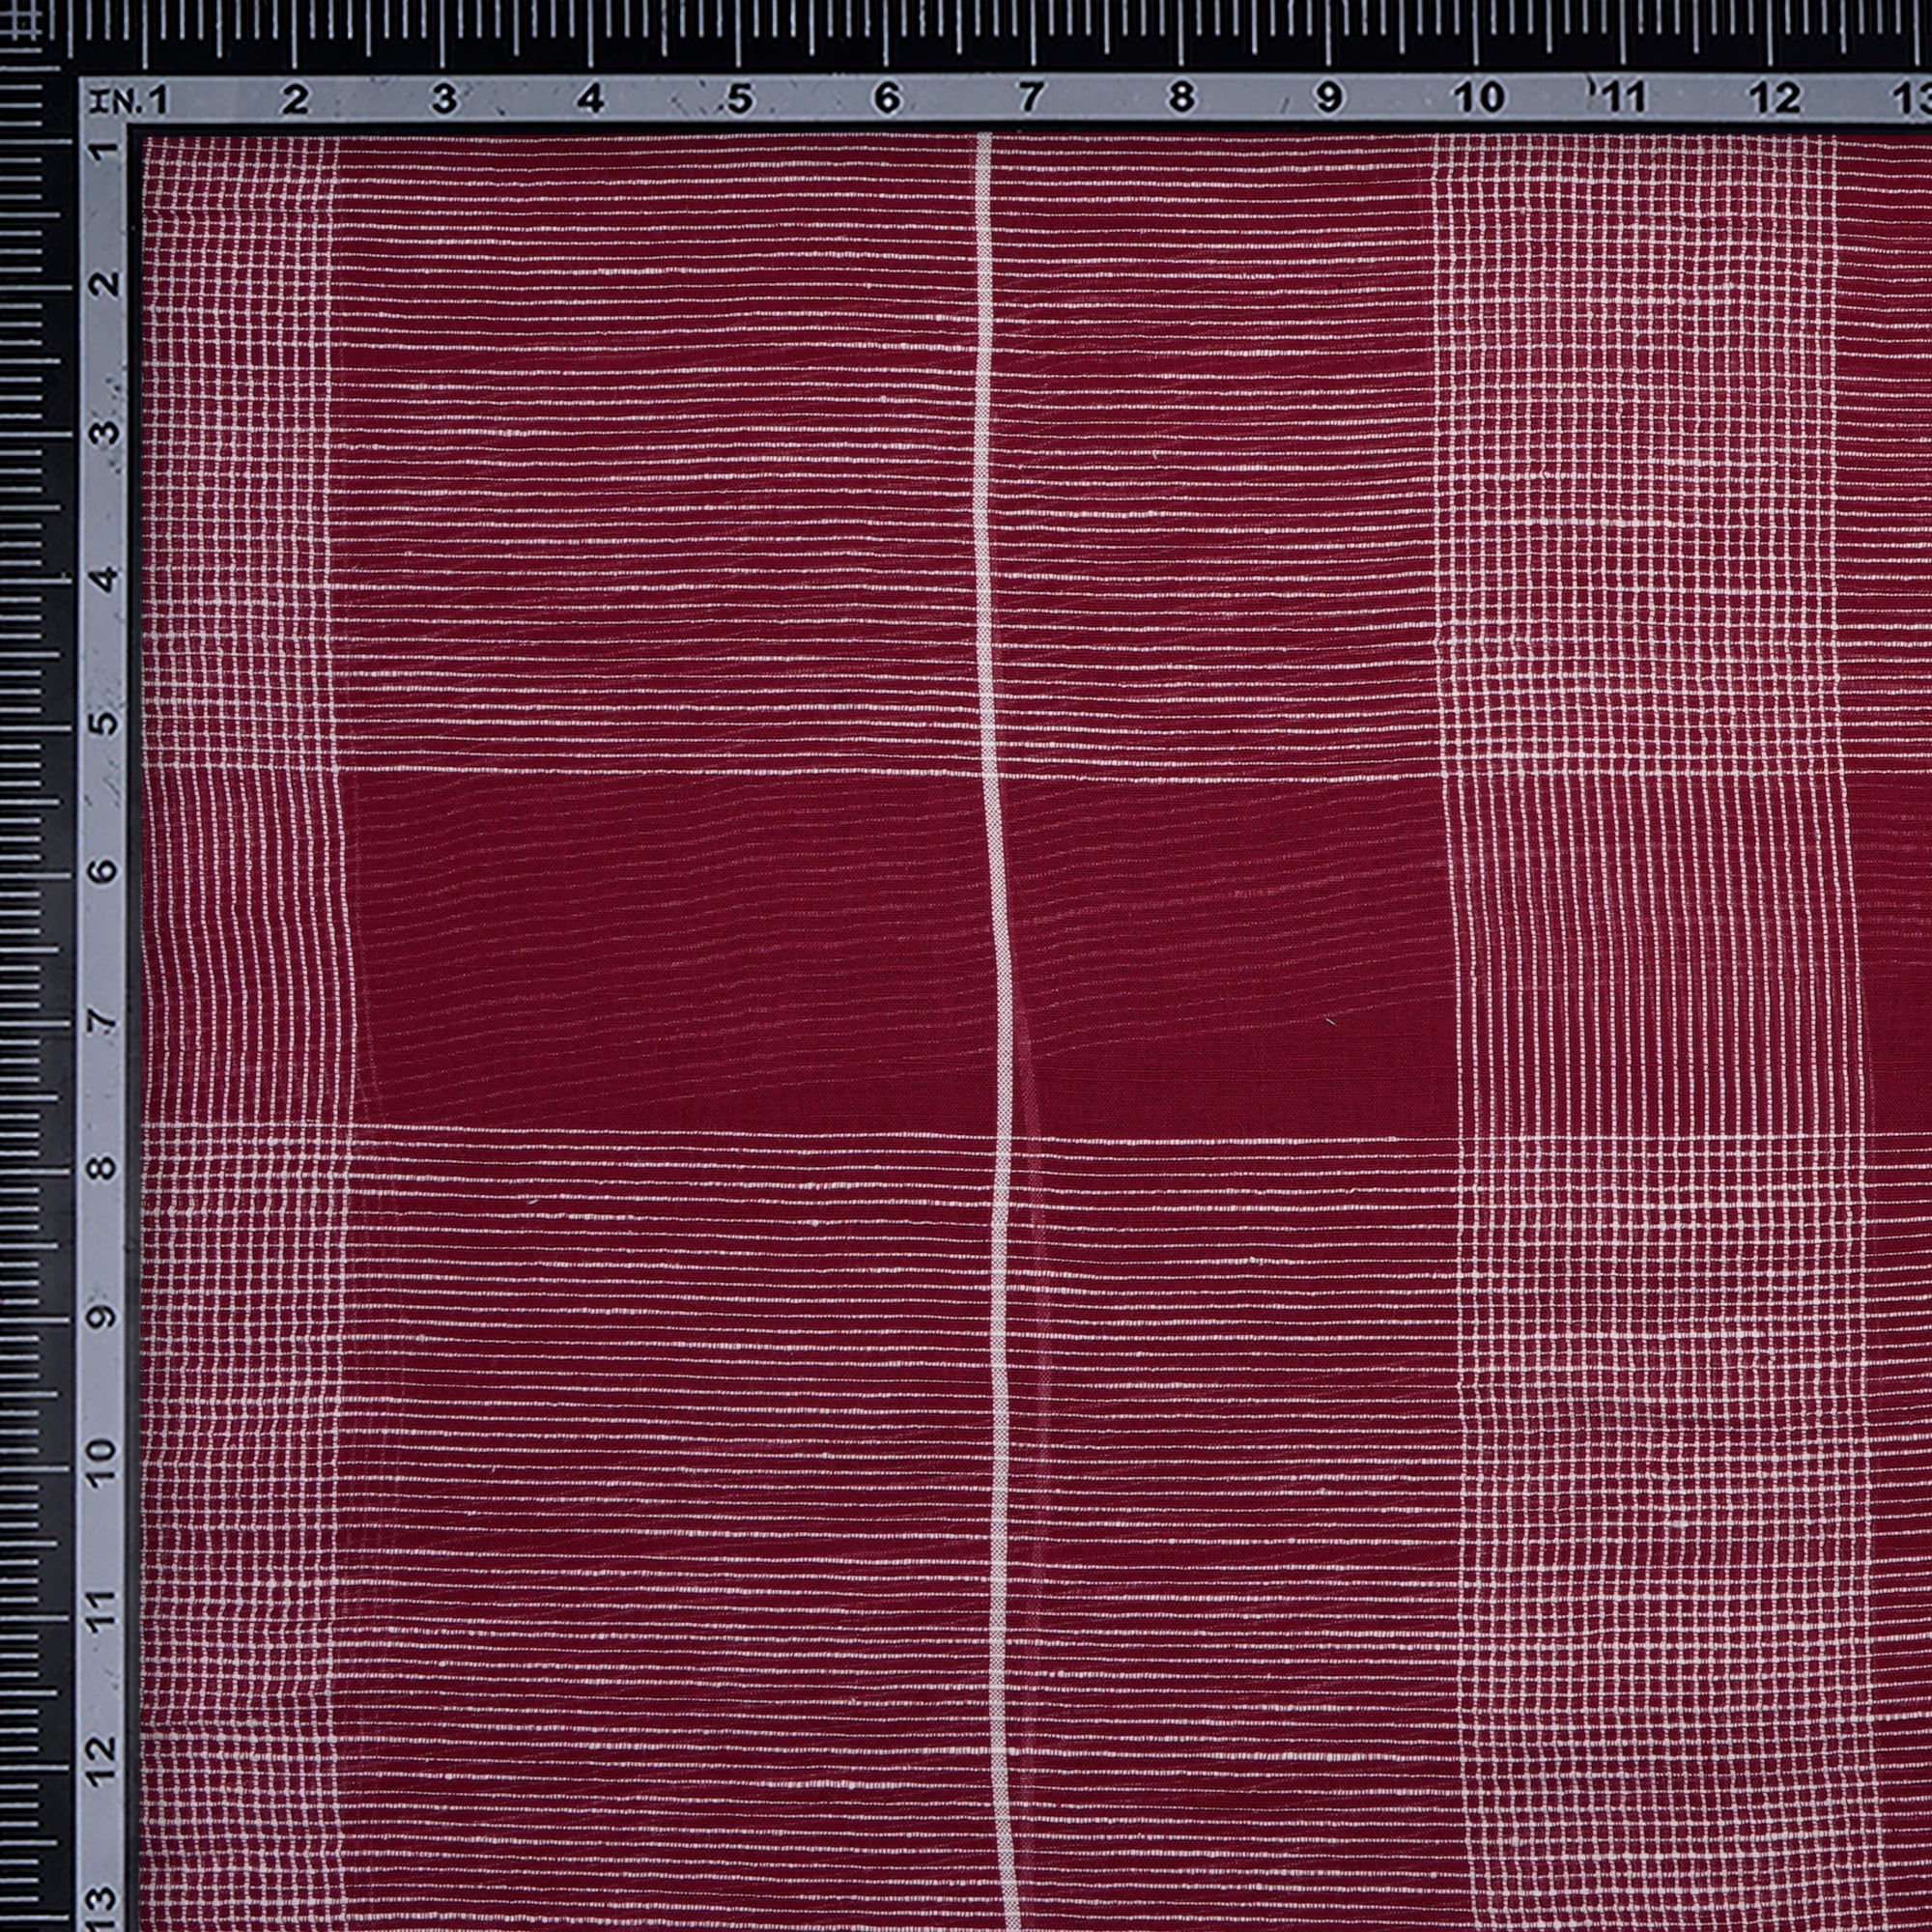 Red Striped Check Pattern Handwoven Muslin Cotton Fabric